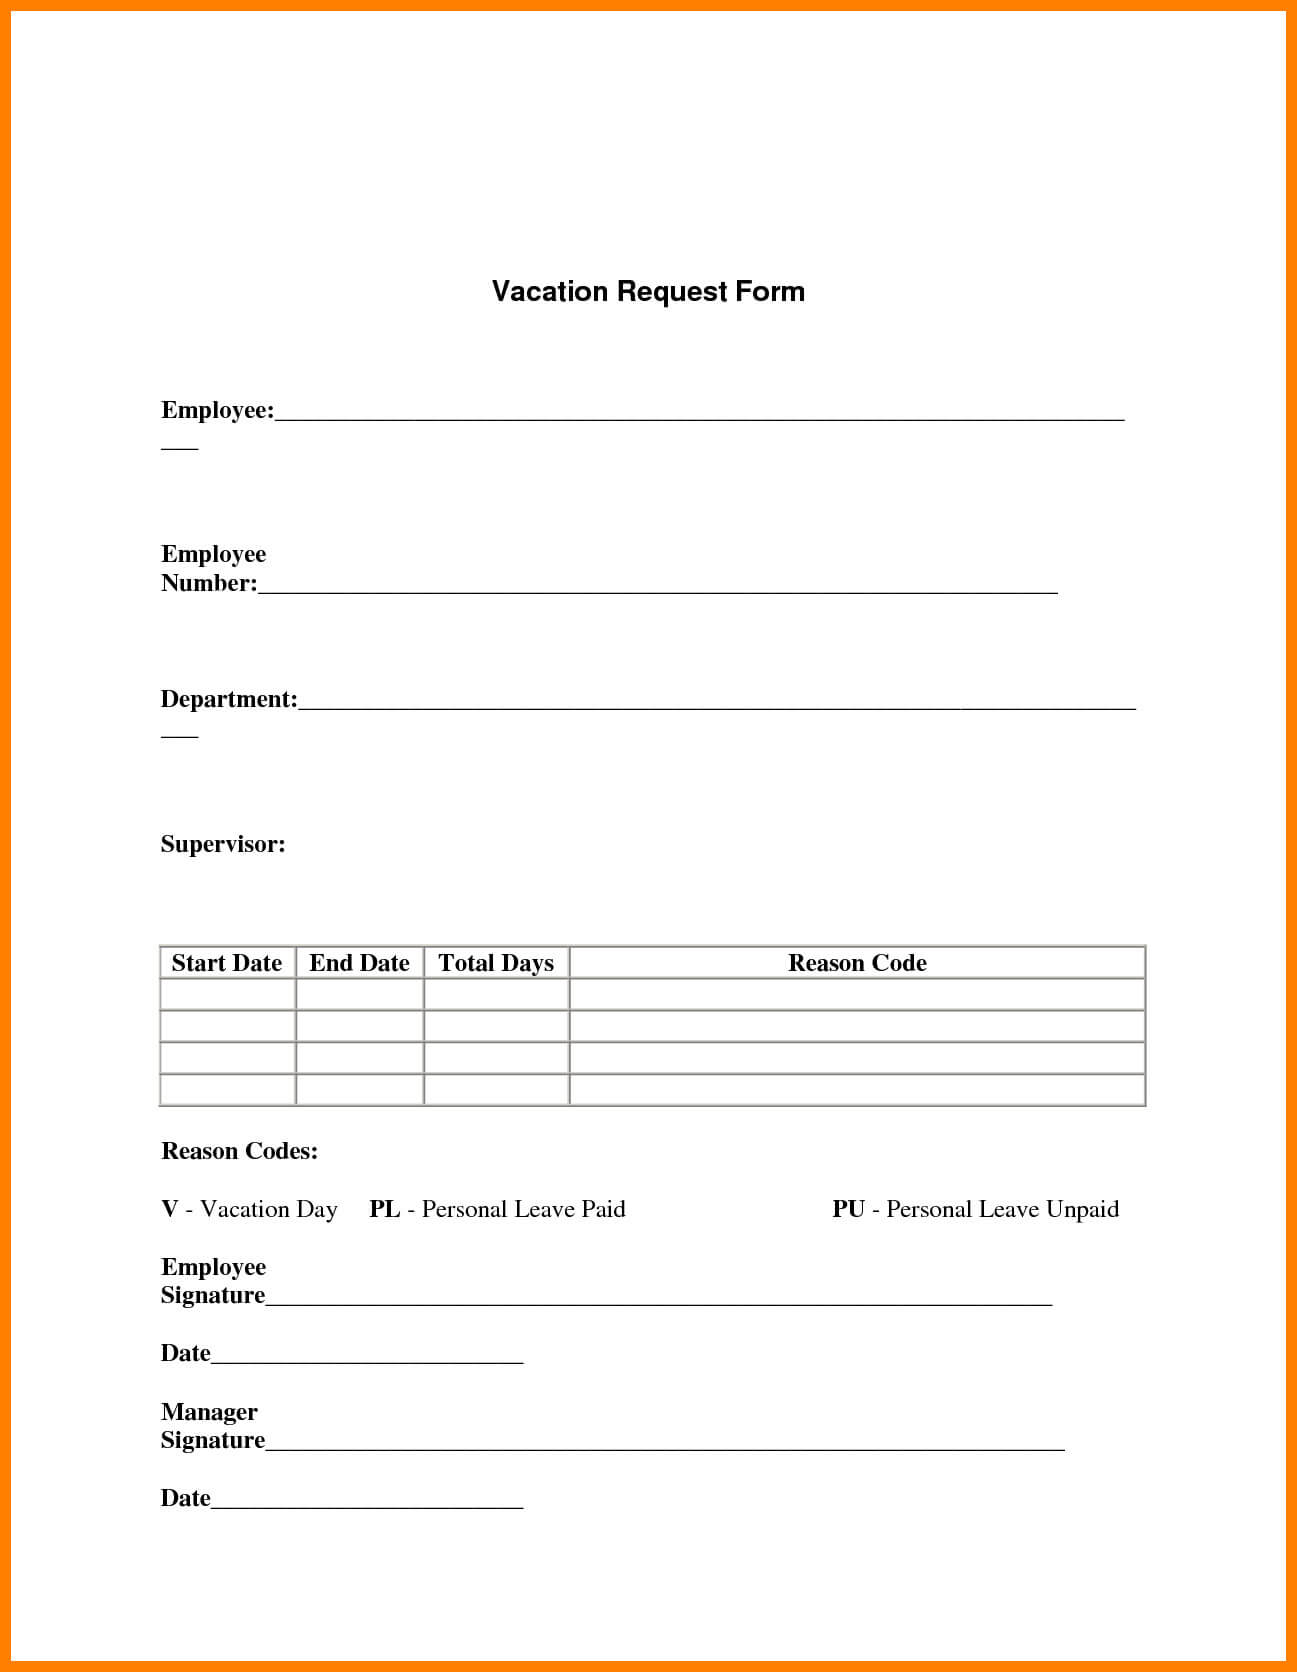 Request format. Request form. Vacation request form. Form Template. Employee vacation request.